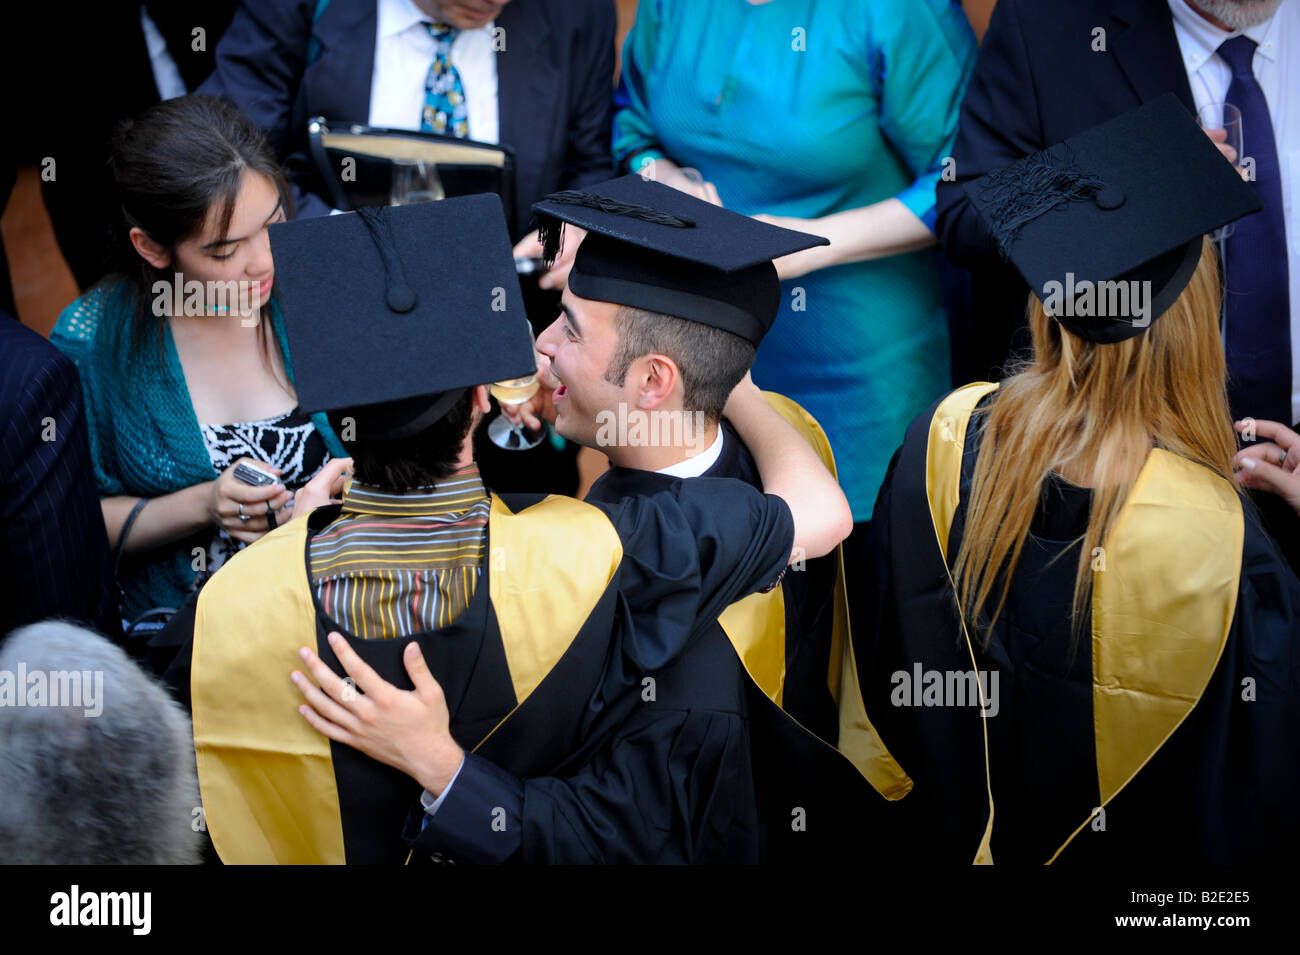 University of Sussex summer graduations at the Brighton Dome - two graduates drinking a toast to one another. Stock Photo